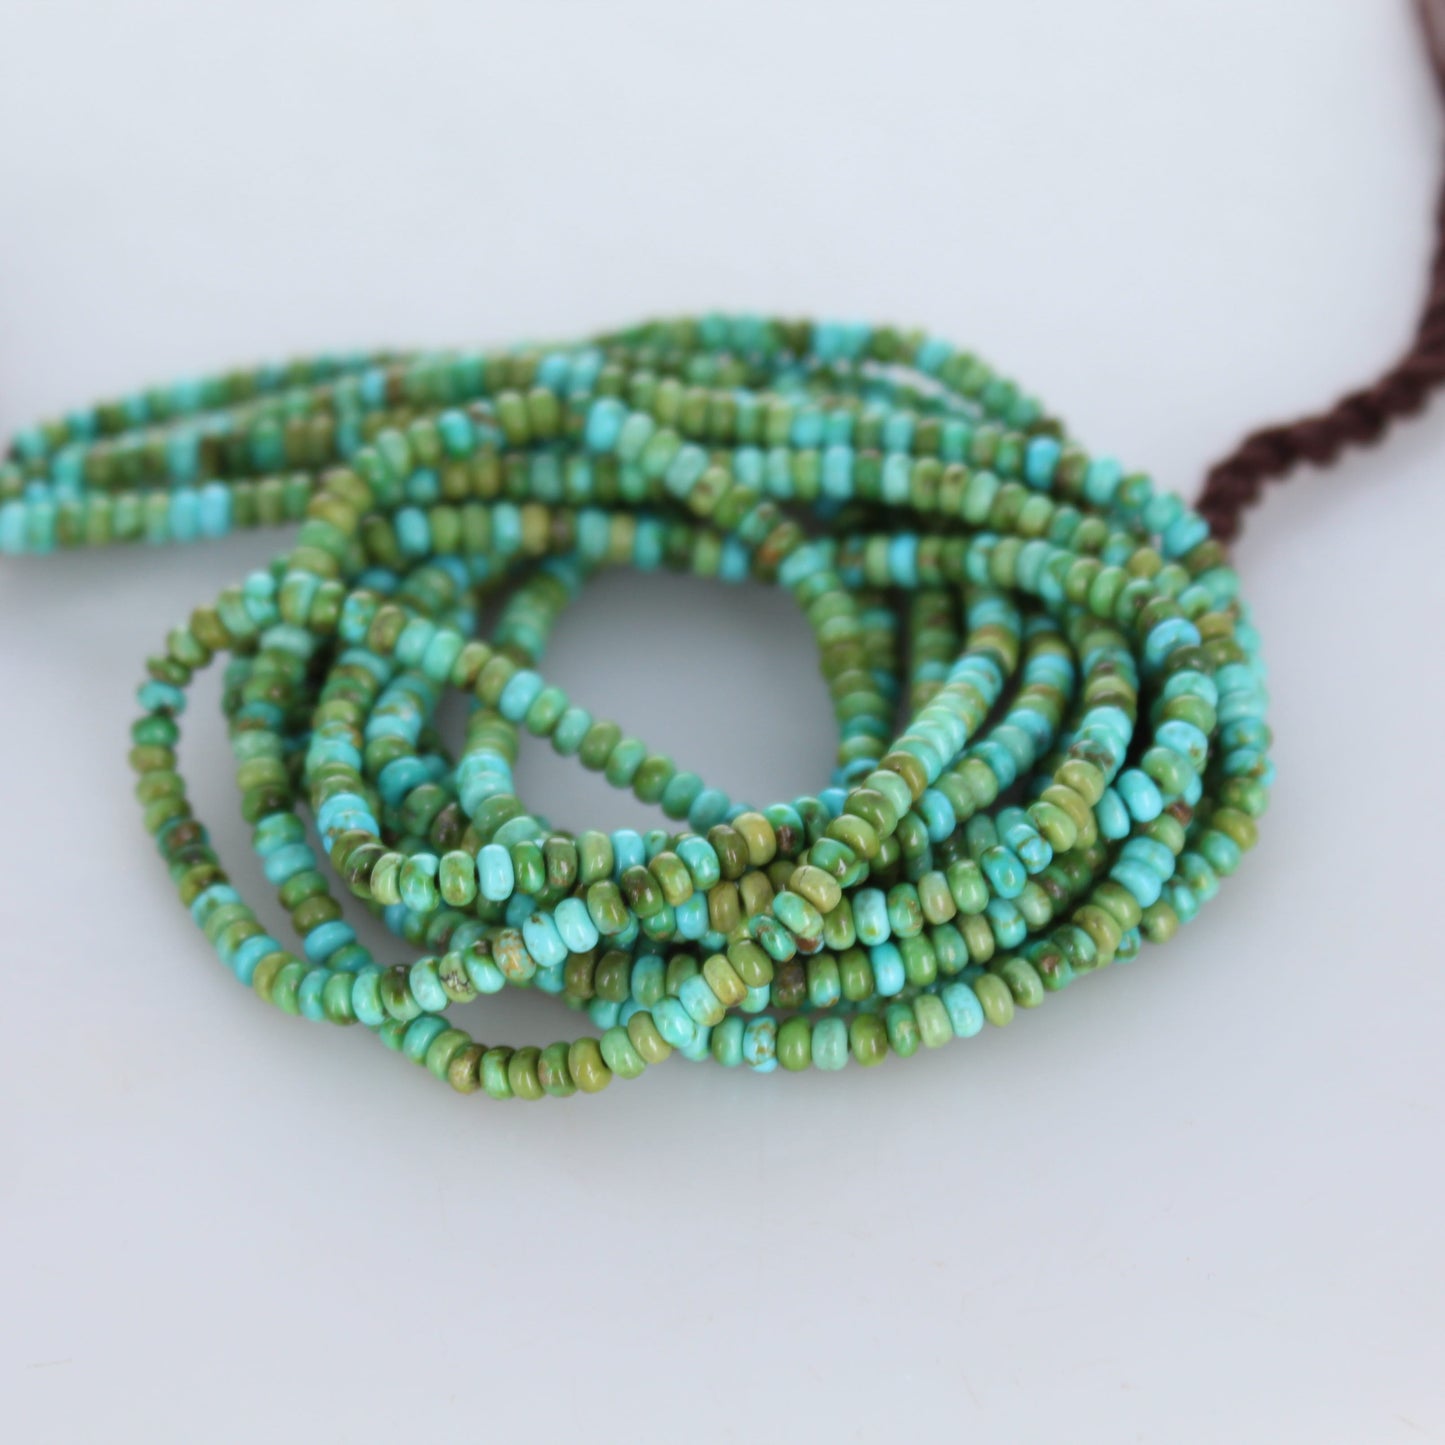 SONORAN GOLD Turquoise Beads Gorgeous Green Blue 3mm Rondelles